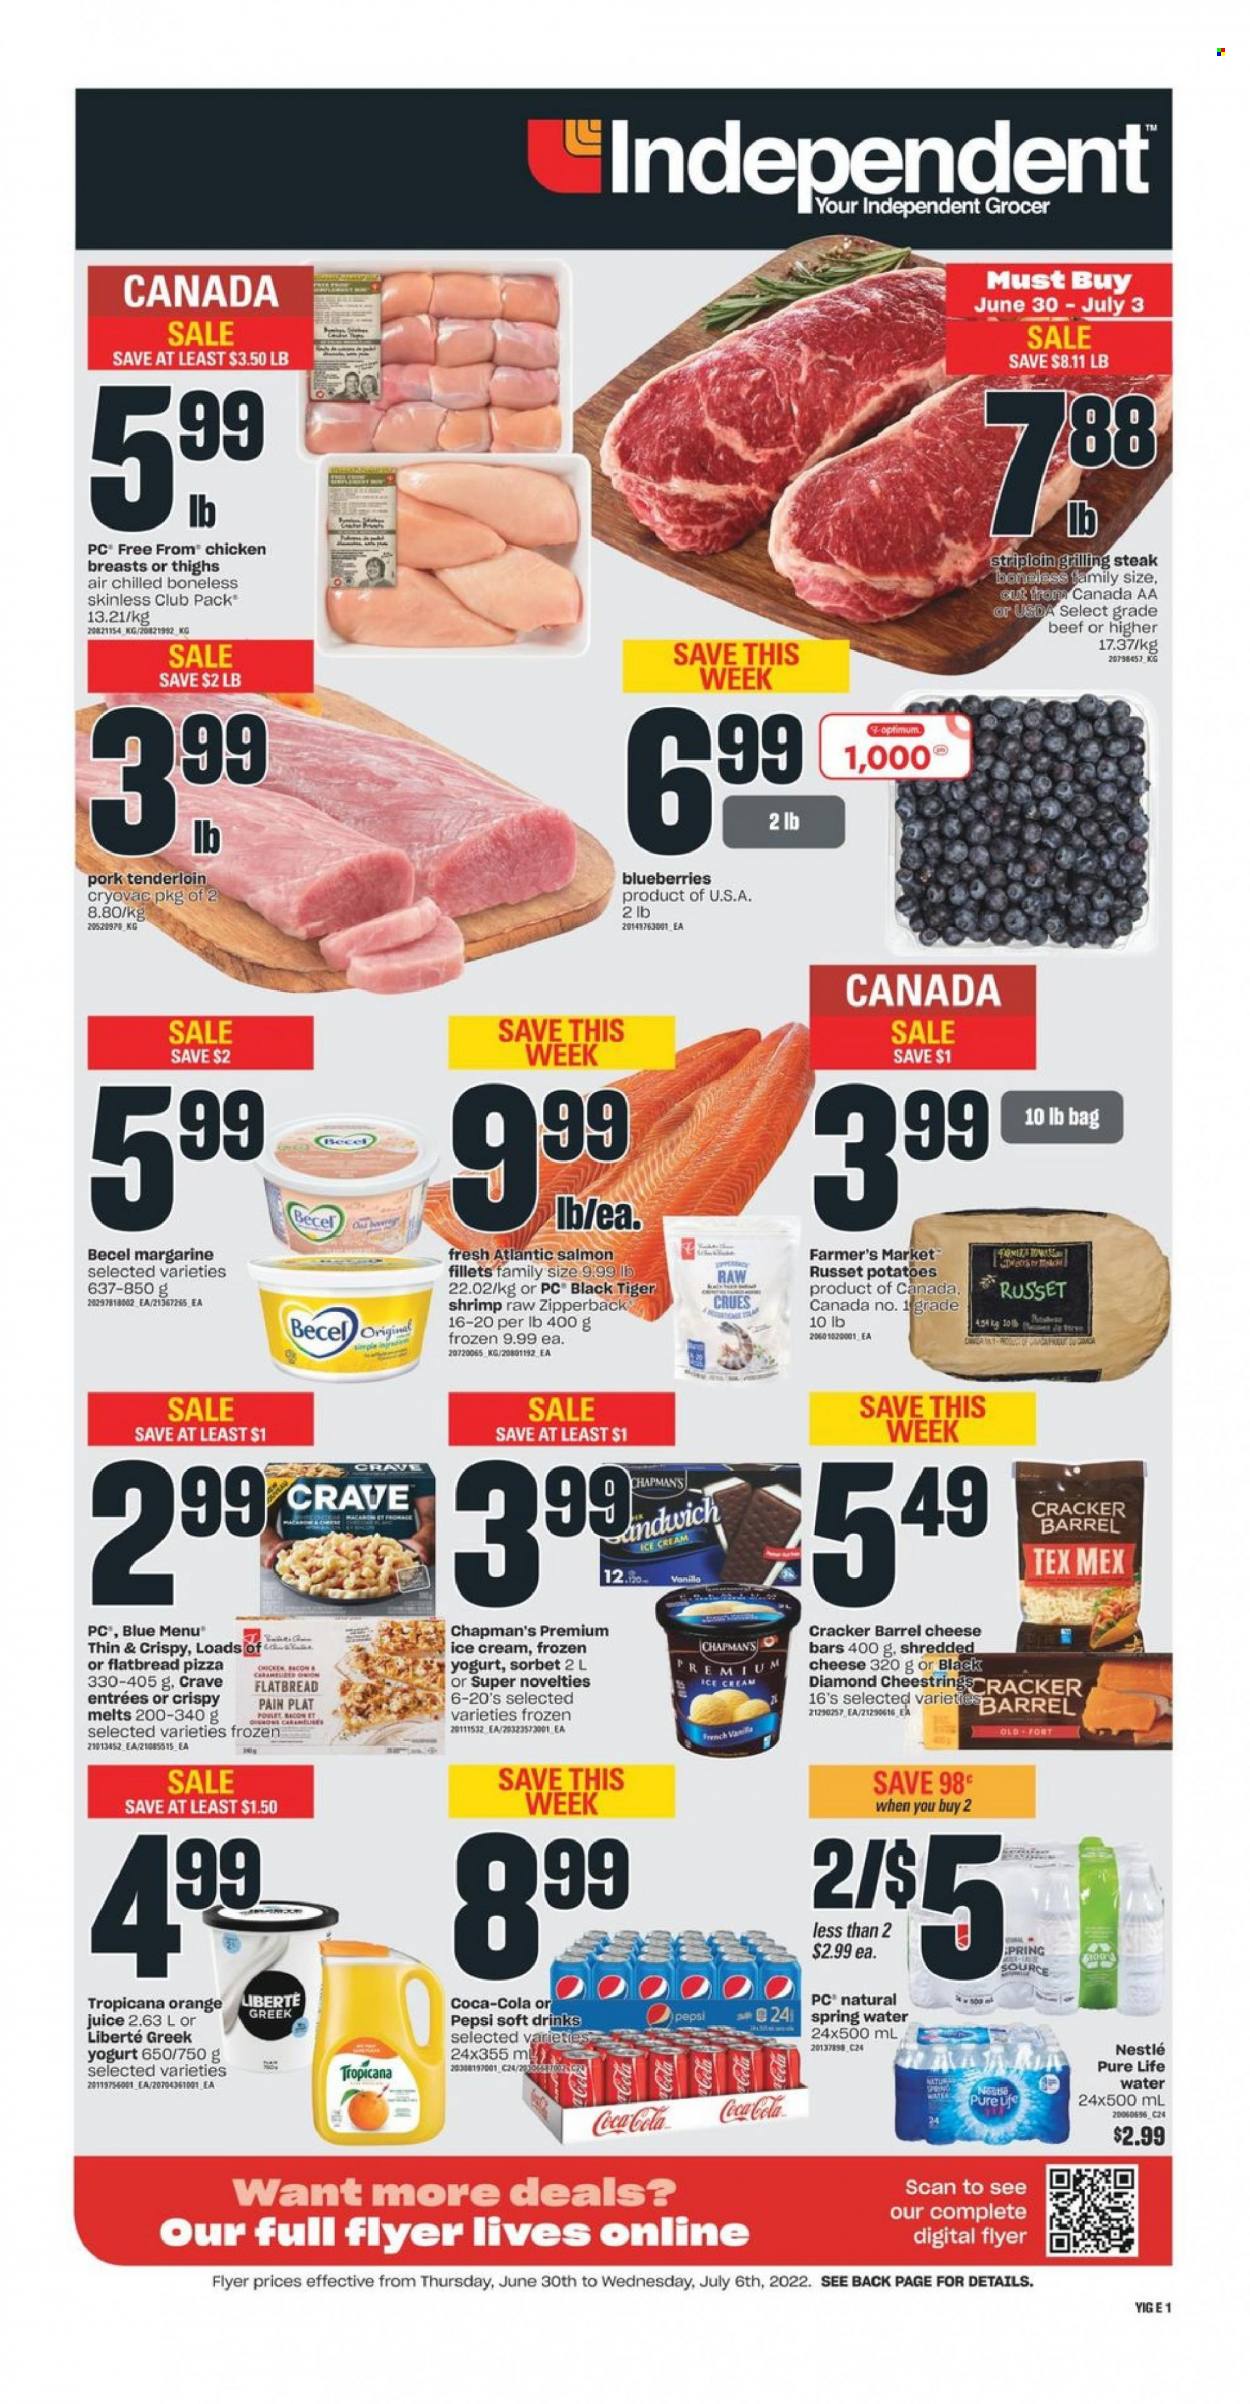 thumbnail - Independent Flyer - June 30, 2022 - July 06, 2022 - Sales products - flatbread, russet potatoes, potatoes, onion, blueberries, salmon, salmon fillet, shrimps, pizza, shredded cheese, yoghurt, margarine, ice cream, crackers, Coca-Cola, Pepsi, juice, soft drink, spring water, Pure Life Water, chicken breasts, pork meat, pork tenderloin, Optimum, Nestlé, steak, oranges. Page 1.